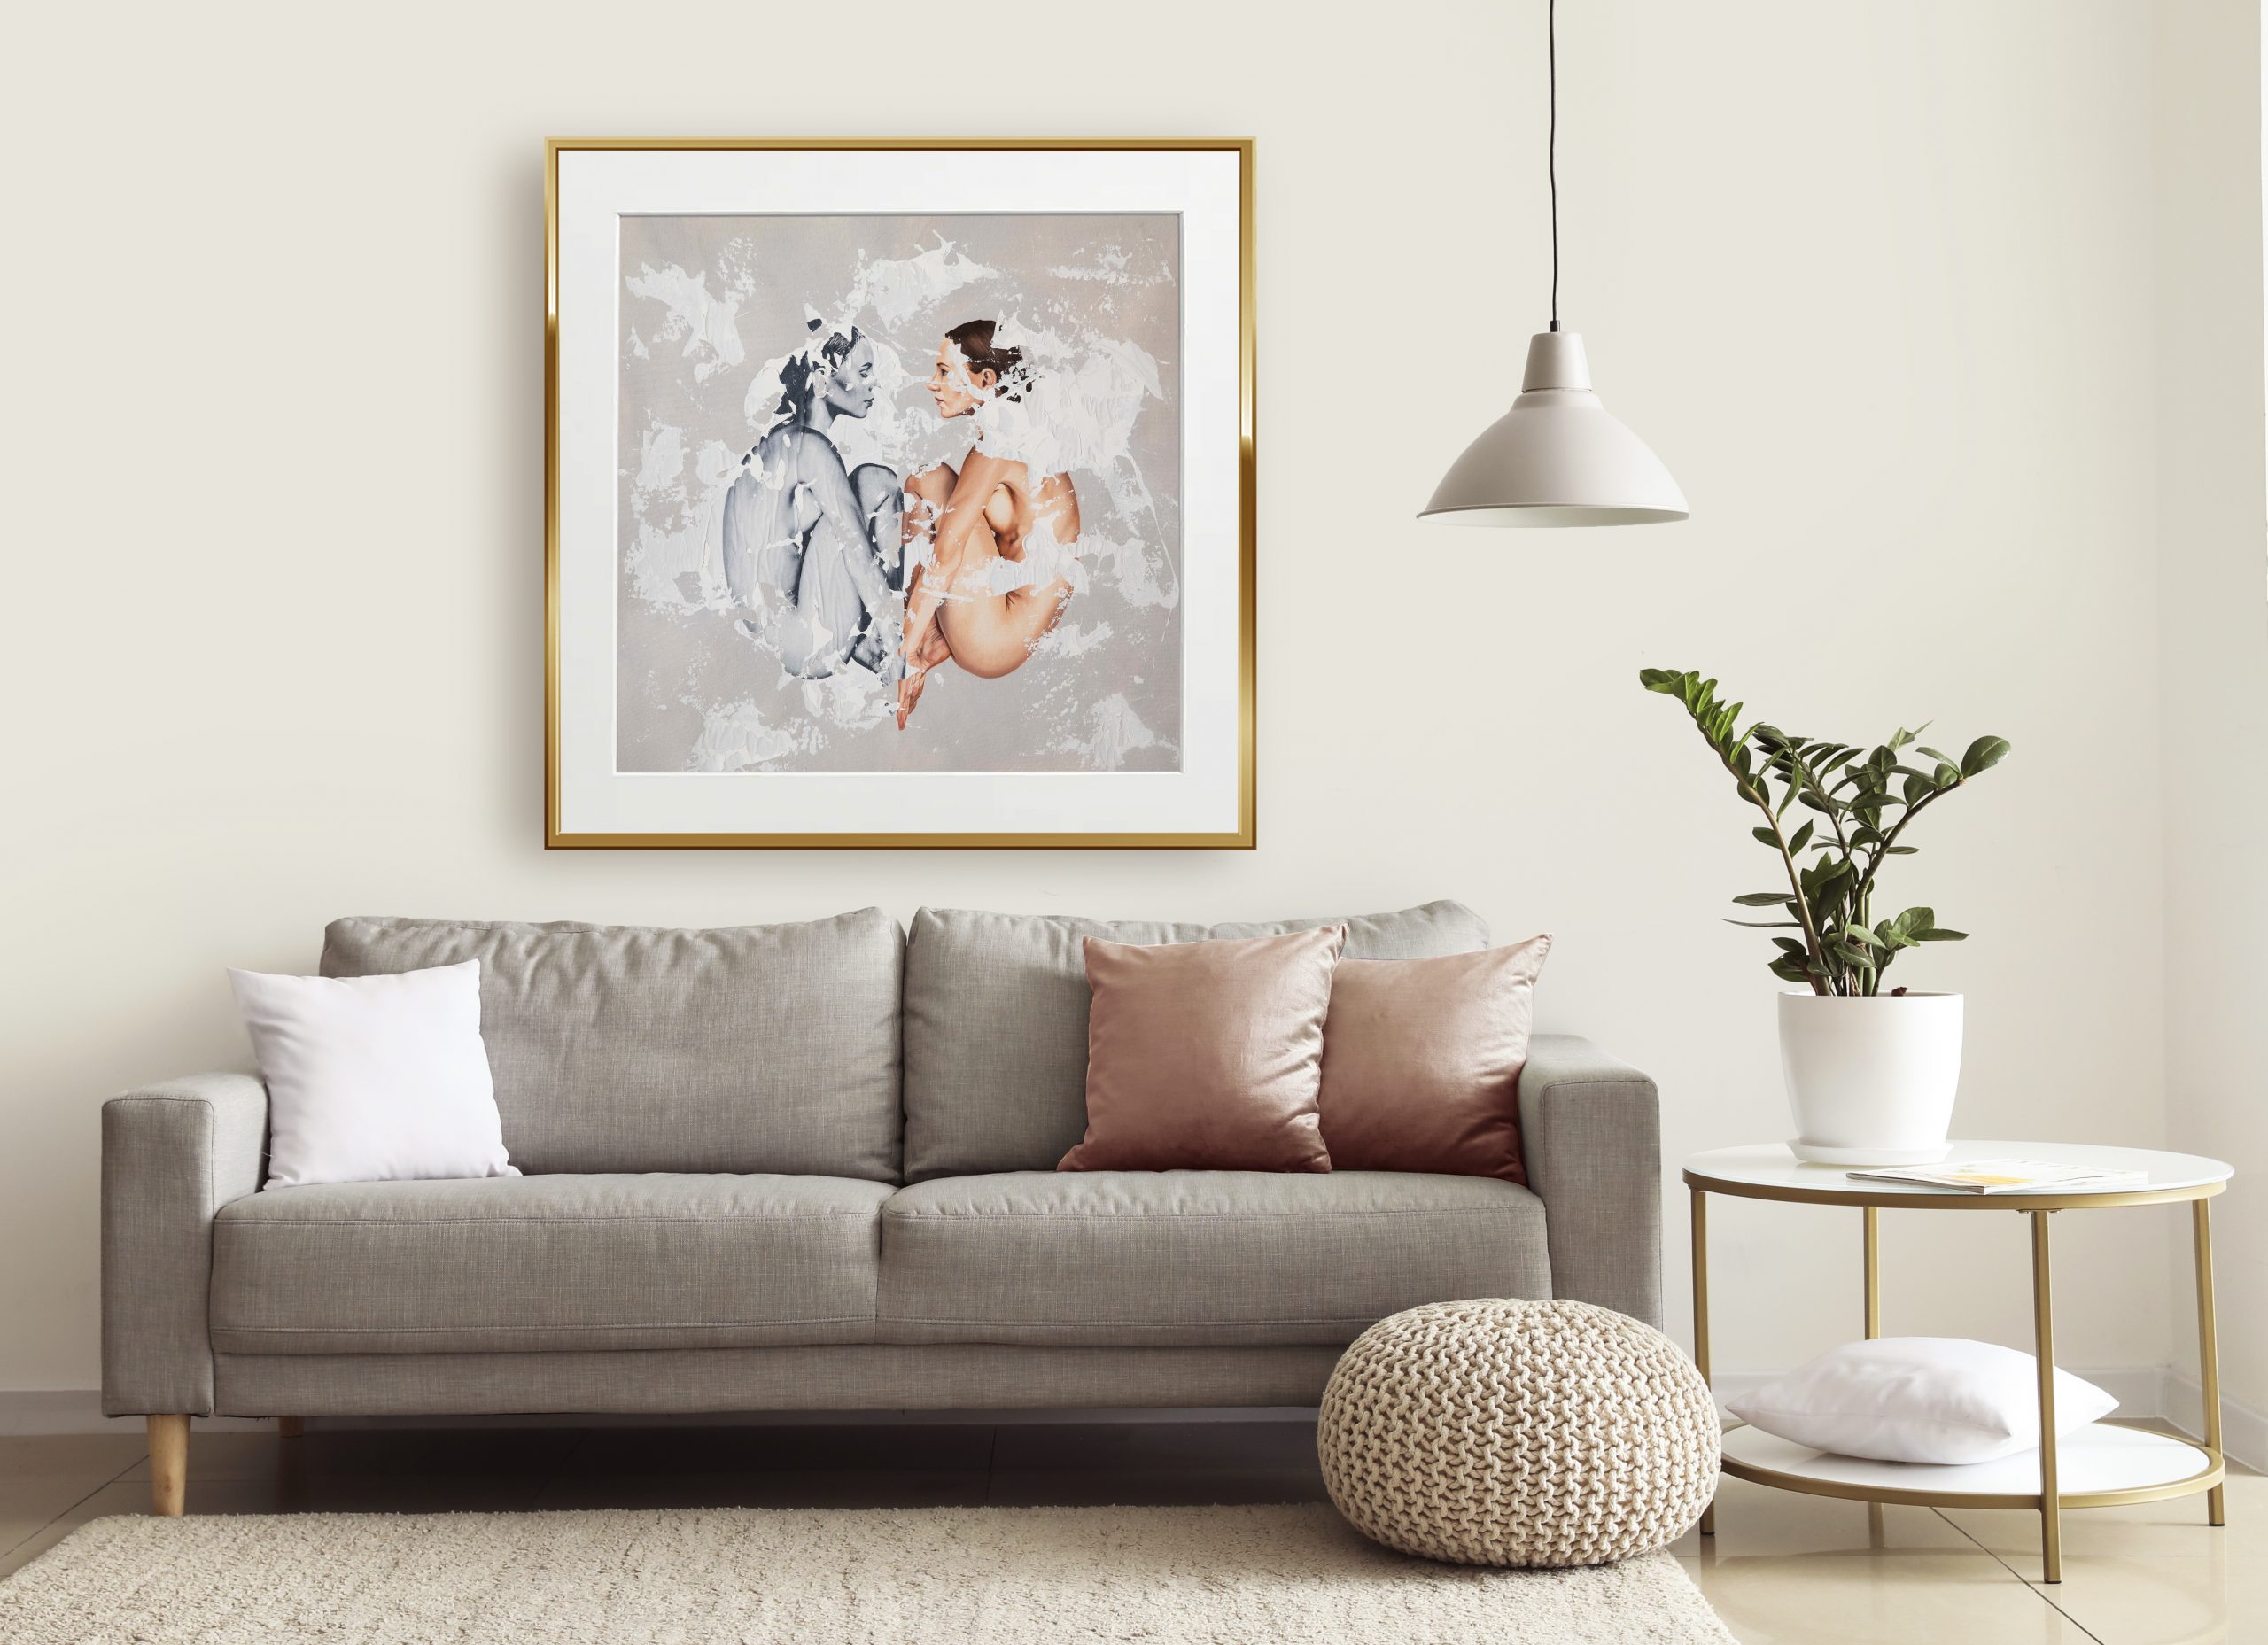 an original figurative artwork in the Interior of modern room with comfortable sofa